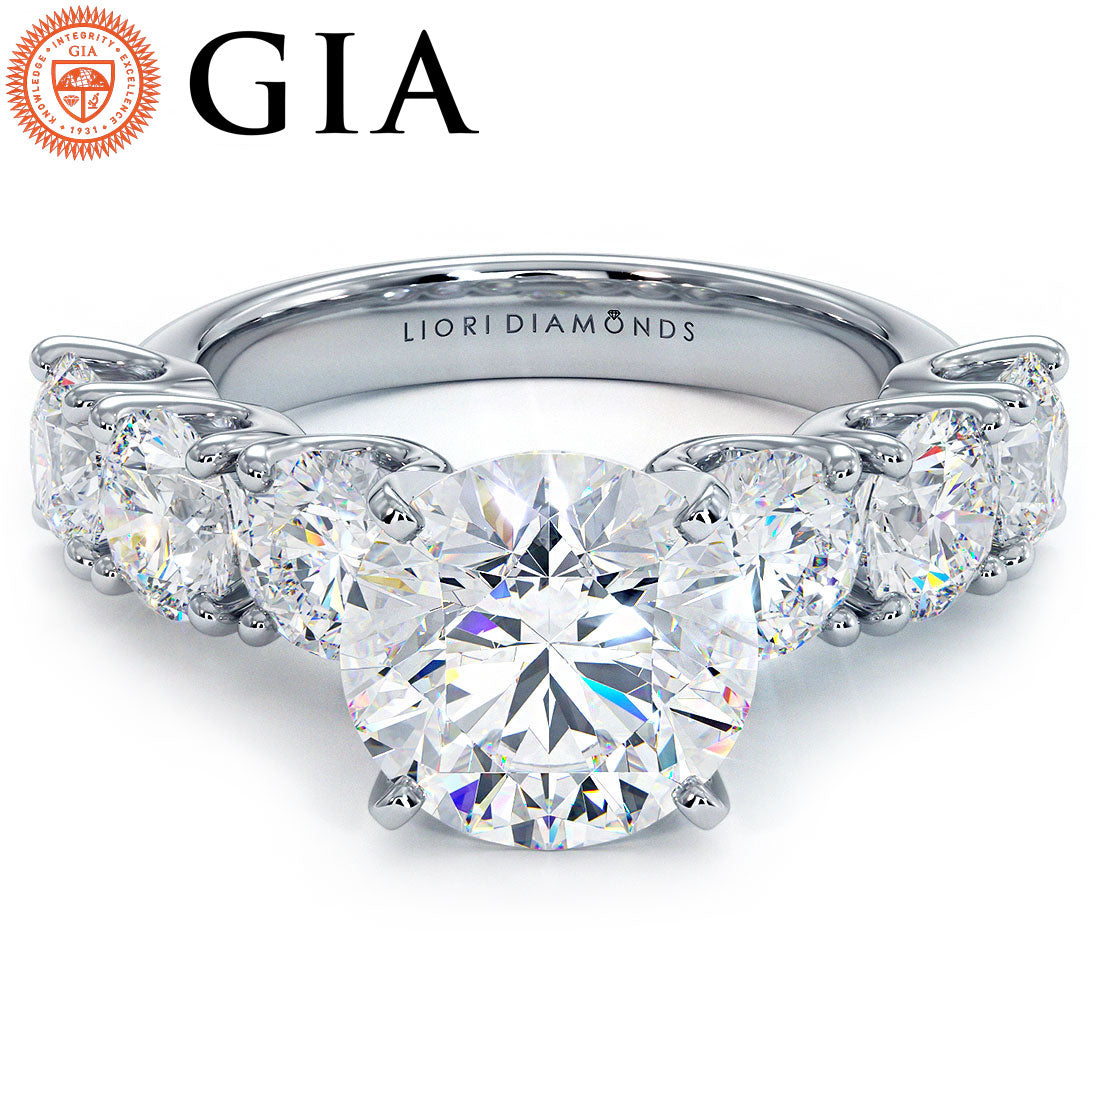 5.71ctw GIA Certified E-VS1 Round Brilliant XL Buttercup Lab Grown Diamond Engagement Ring set in 14k White Gold